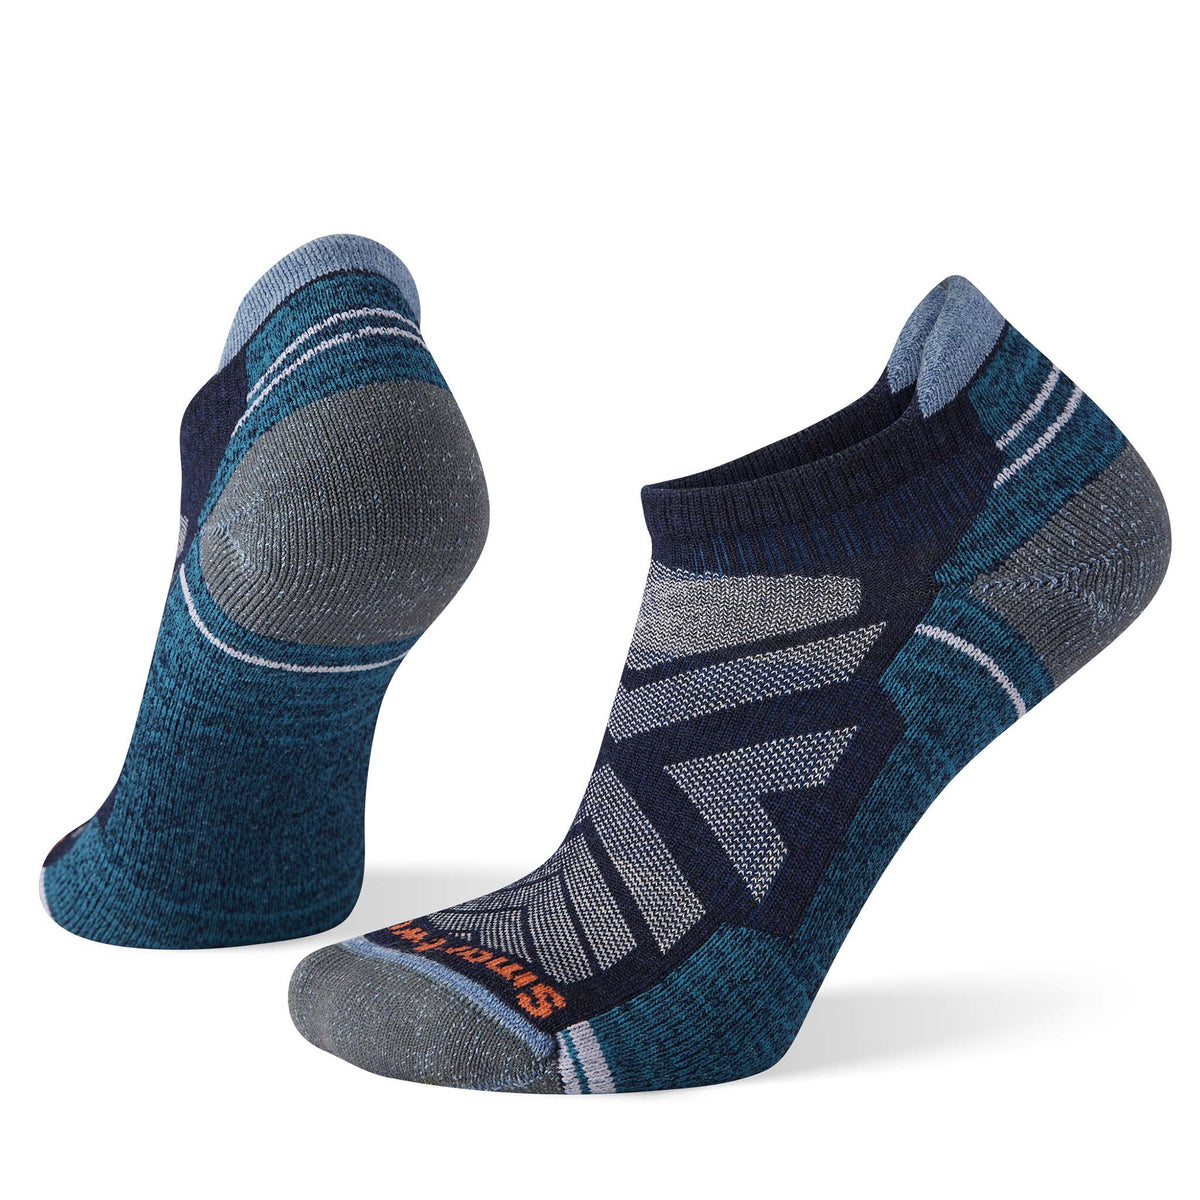 Smartwool Performance Hike Light Cushion chaussettes basses deep navyfemme